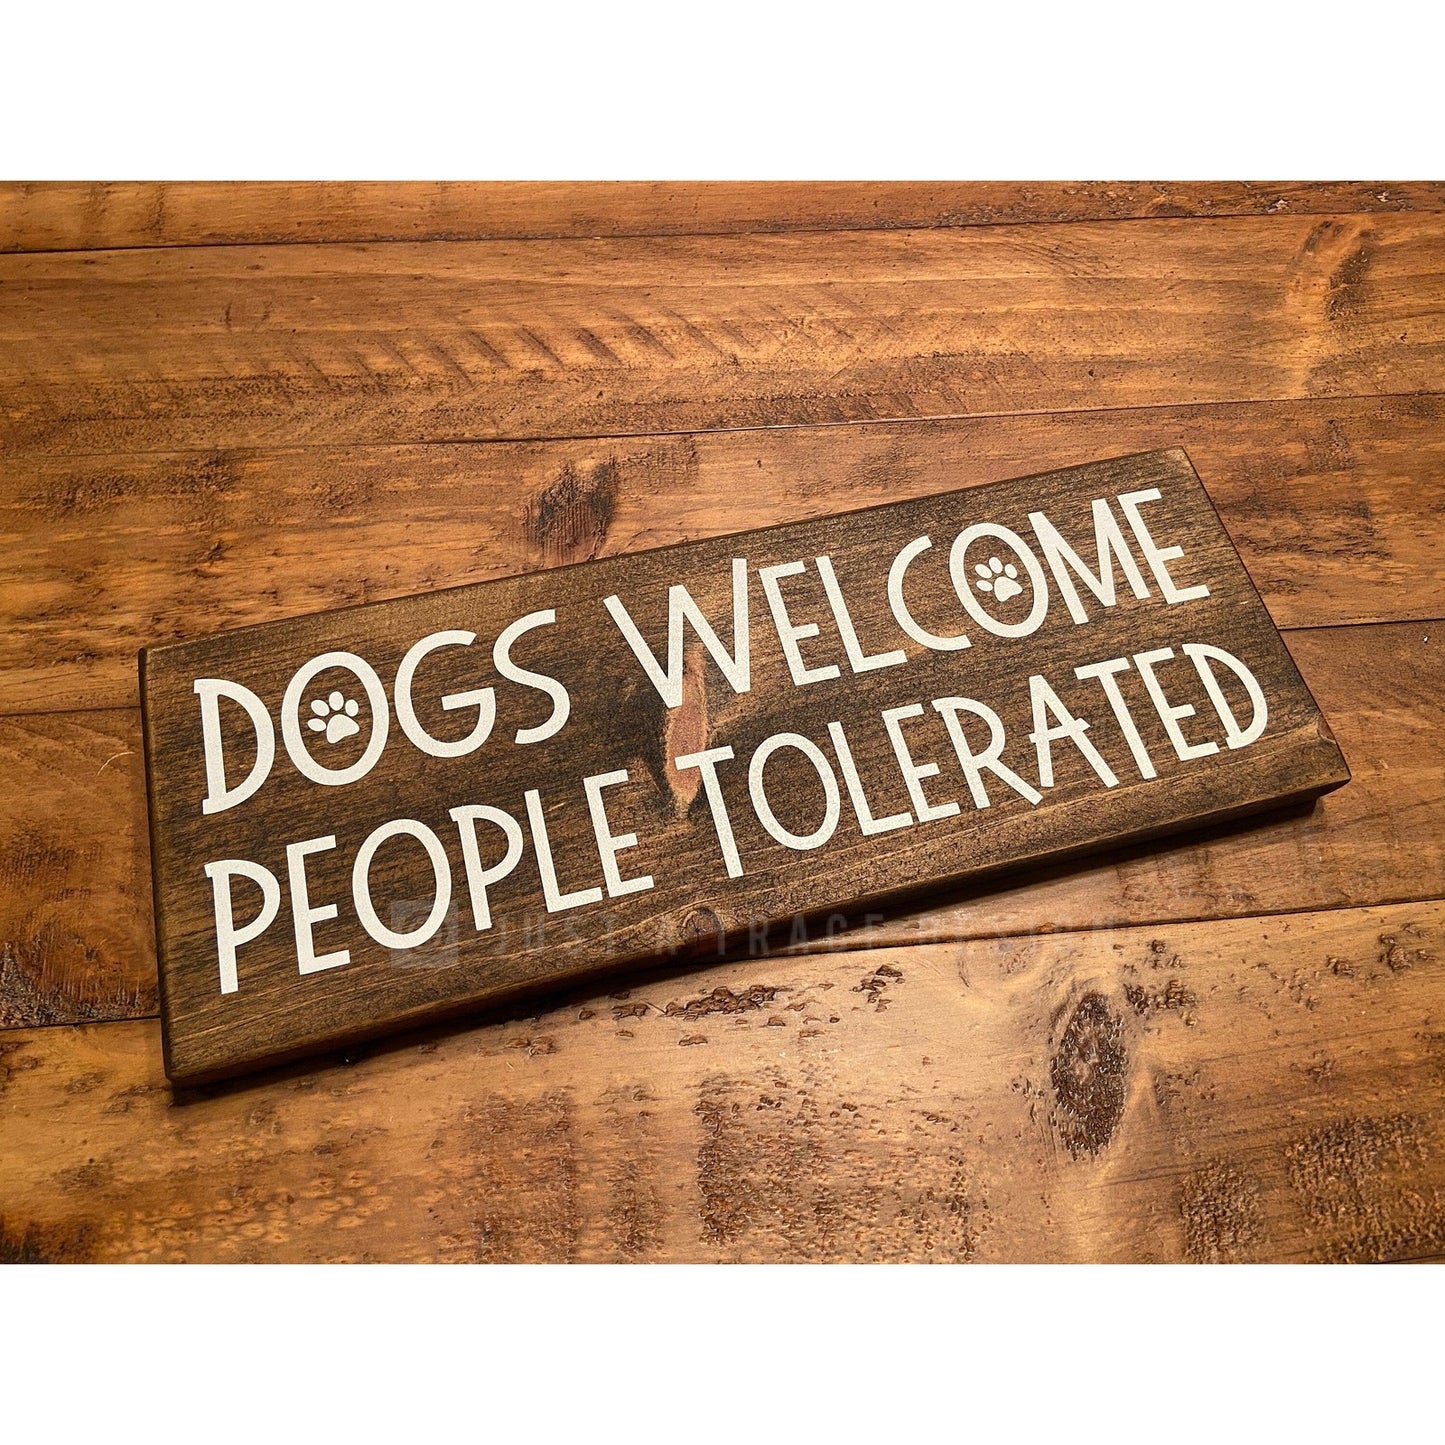 Dogs Welcome - People Tolerated - Dog Sign - Dog Lover - Funny Wood Sign - Pet Decor - Wooden Sign - Pet Owner Gift - Welcome Sign